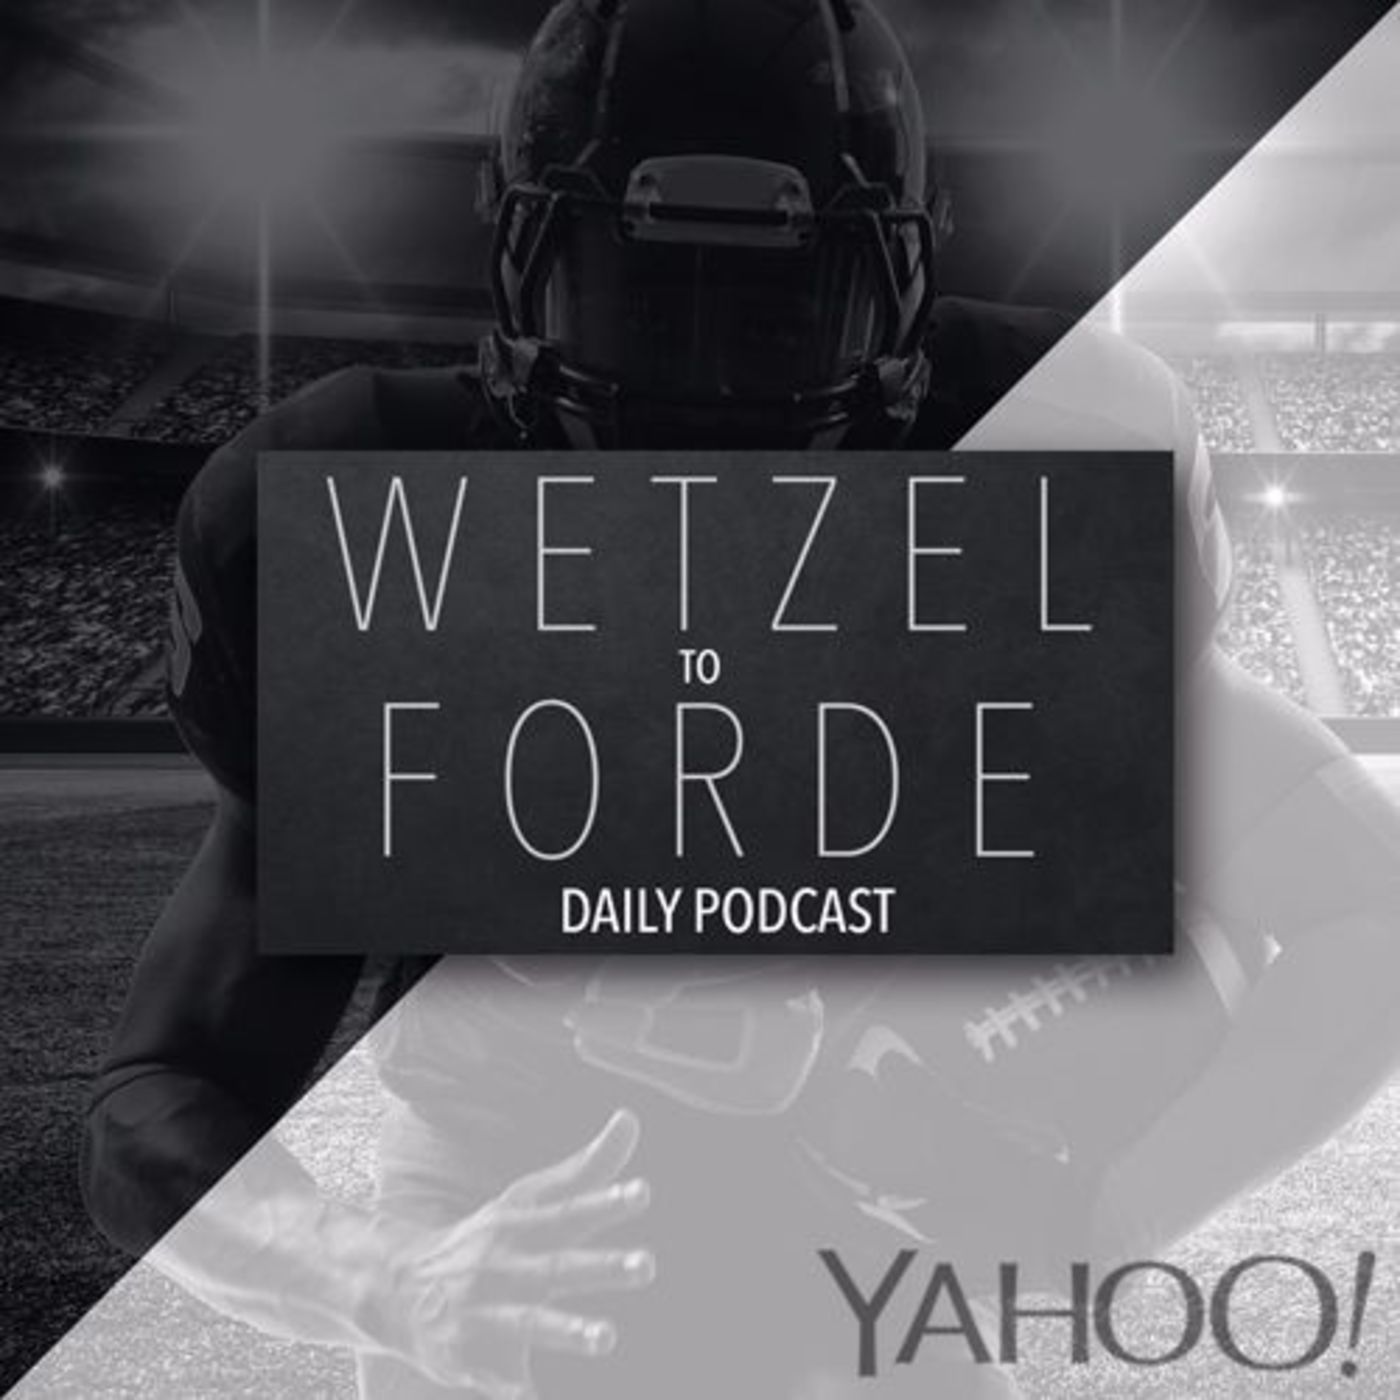 Is Cam's domination inevitable? Waffle House & Cro's child support. Wetzel To Forde (1 - 20 - 16)